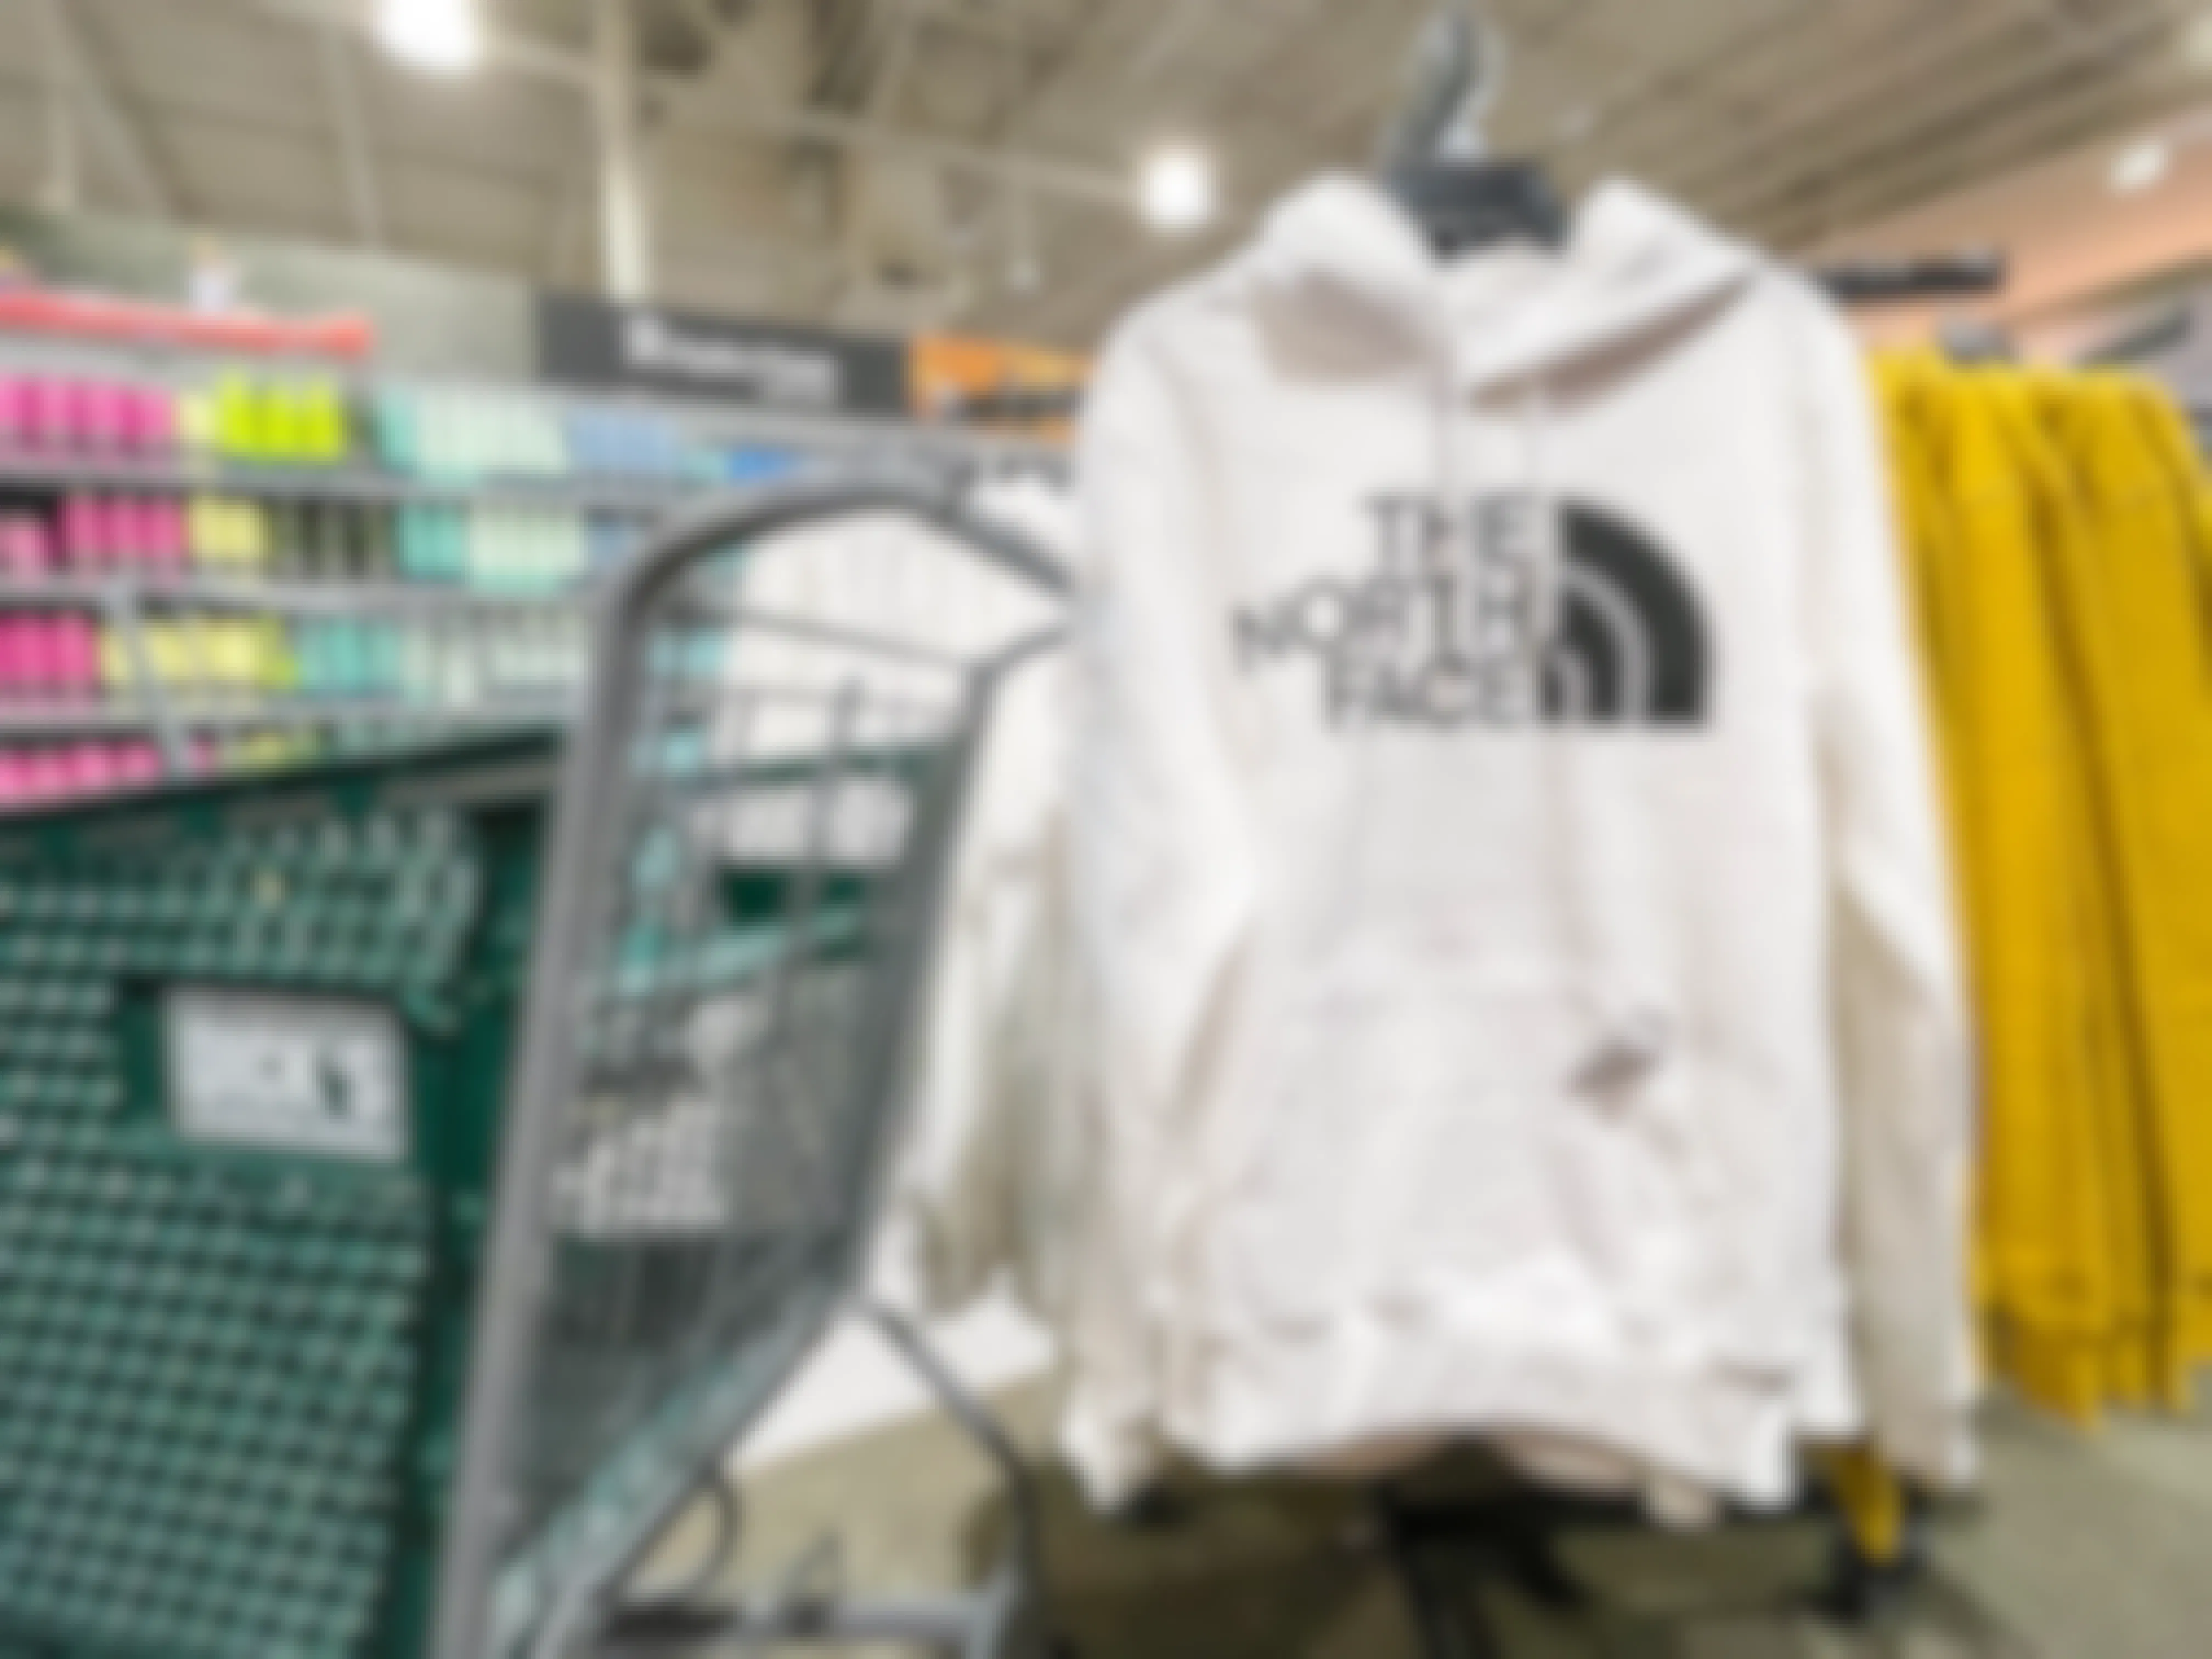 A The North face sweater next to a Dicks sporting Goods shopping cart